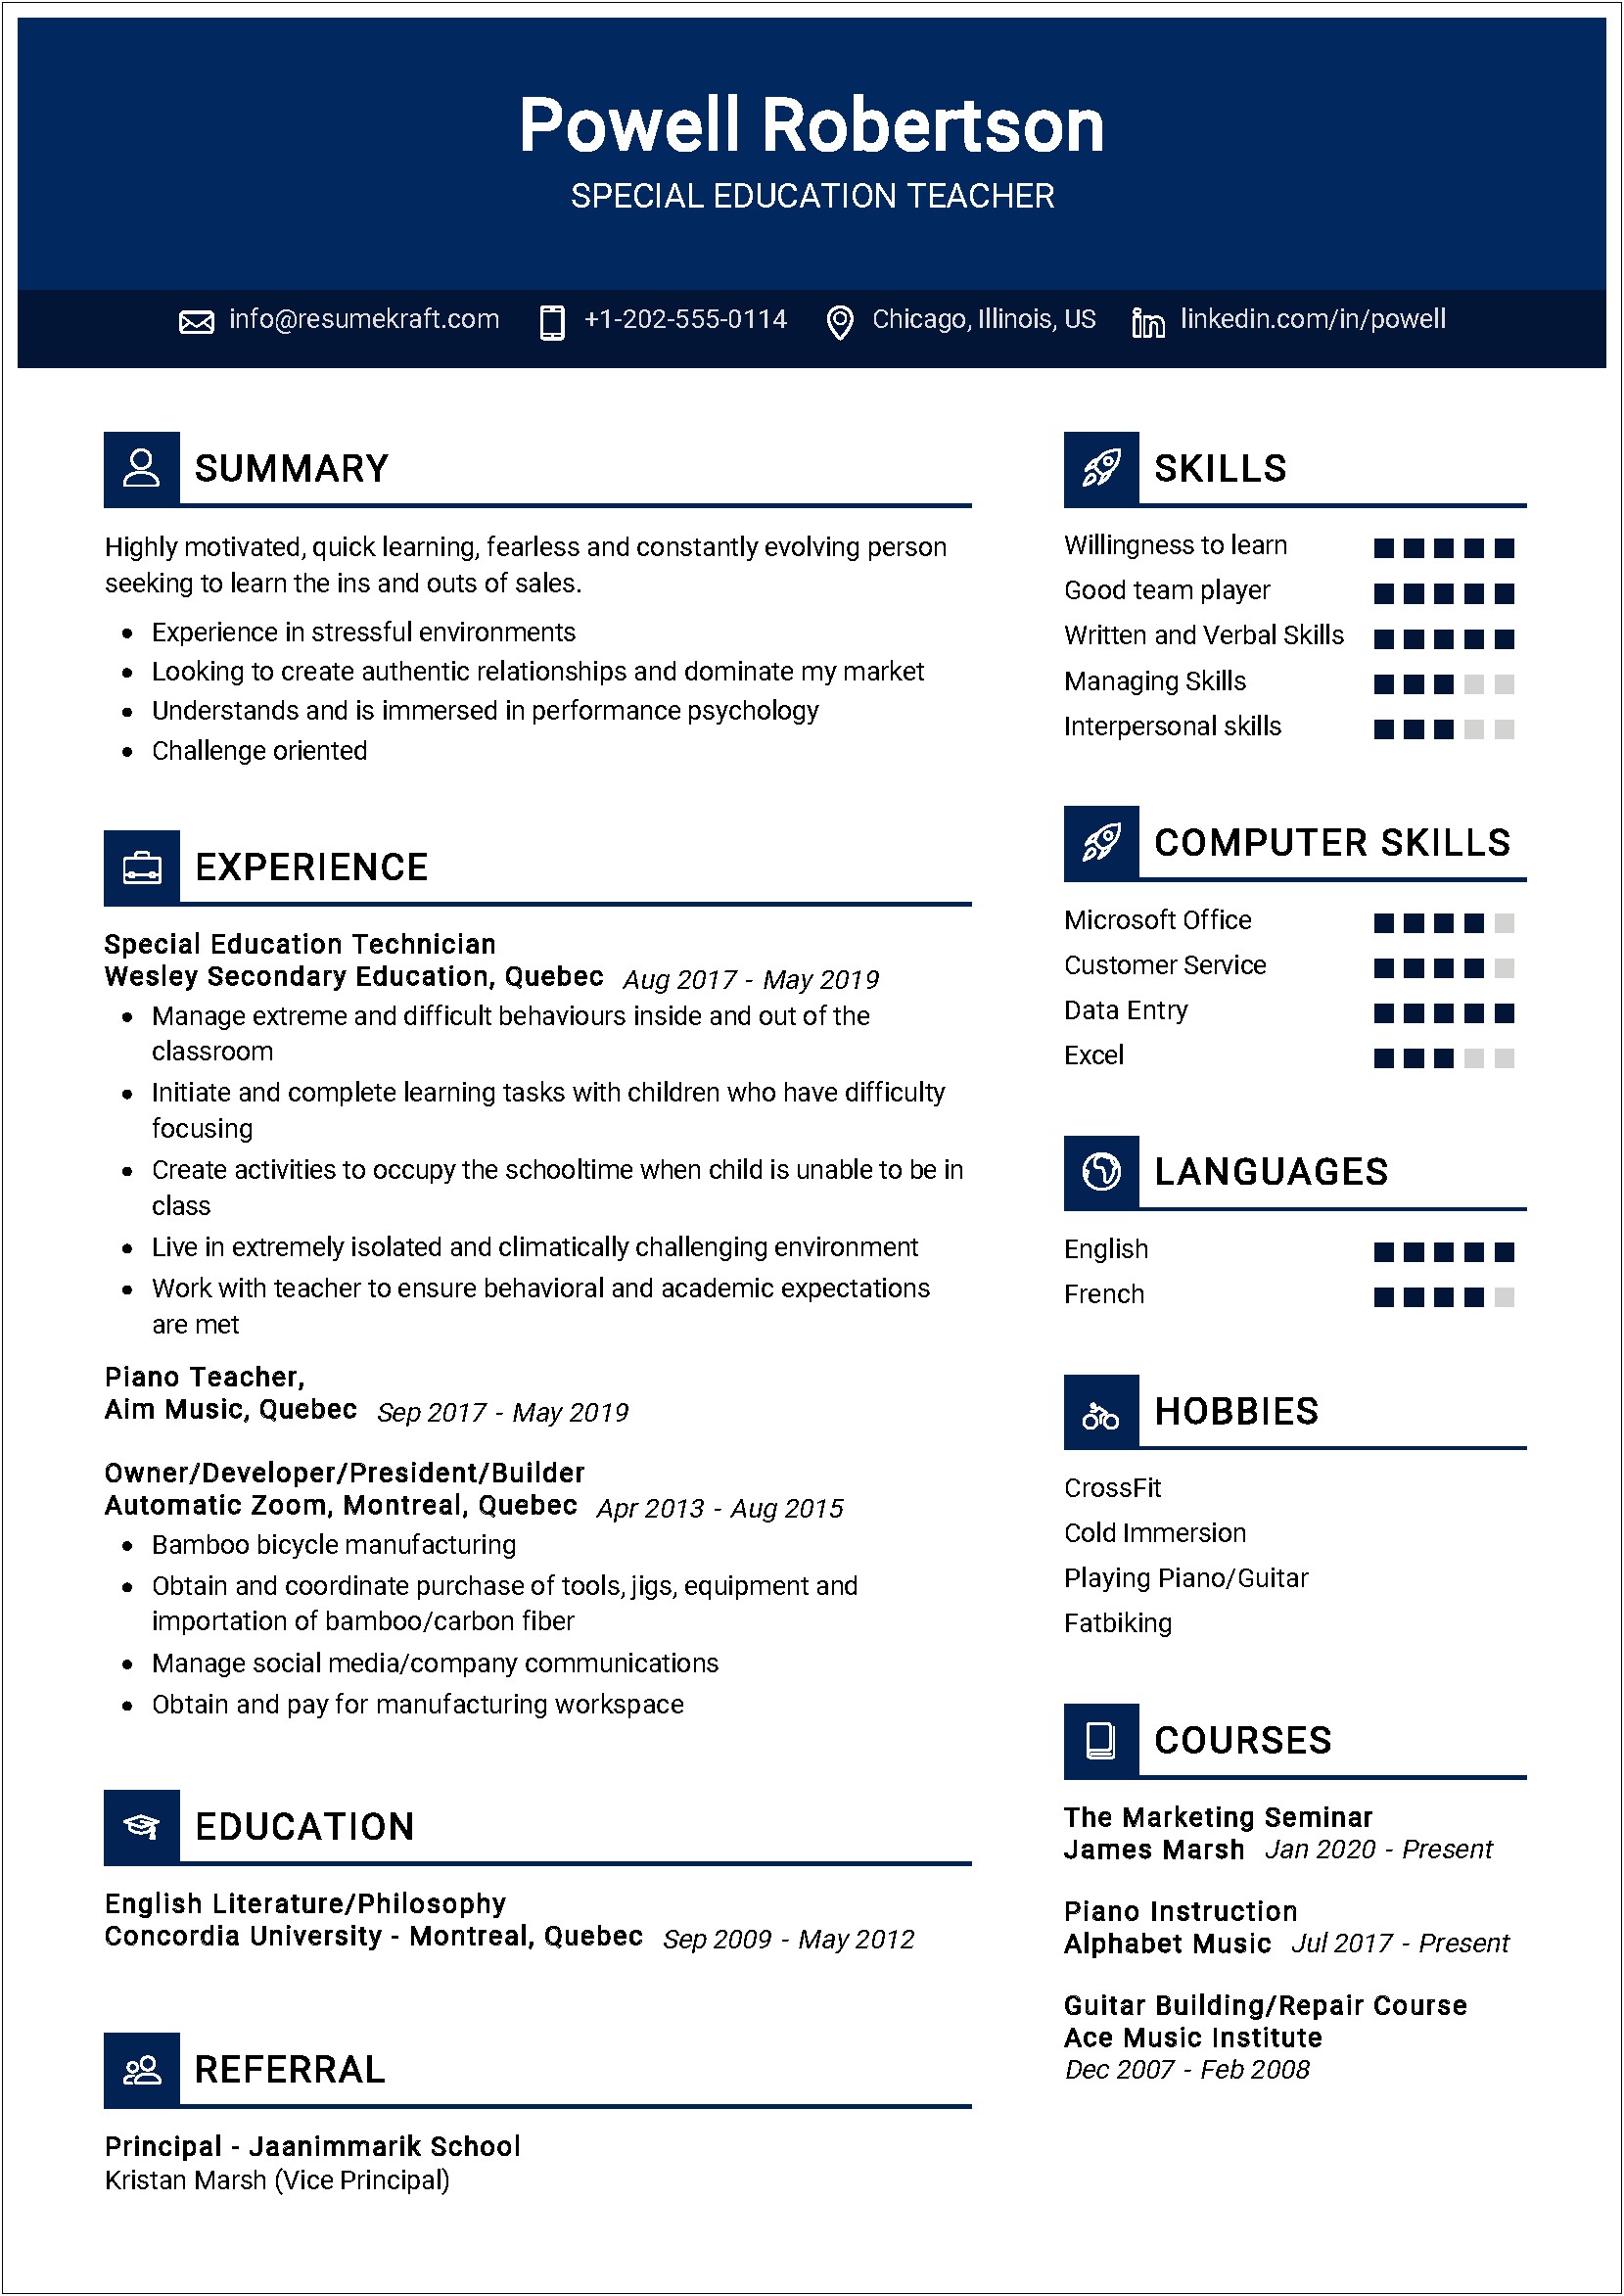 Sample Resume Special Education Paraprofessional